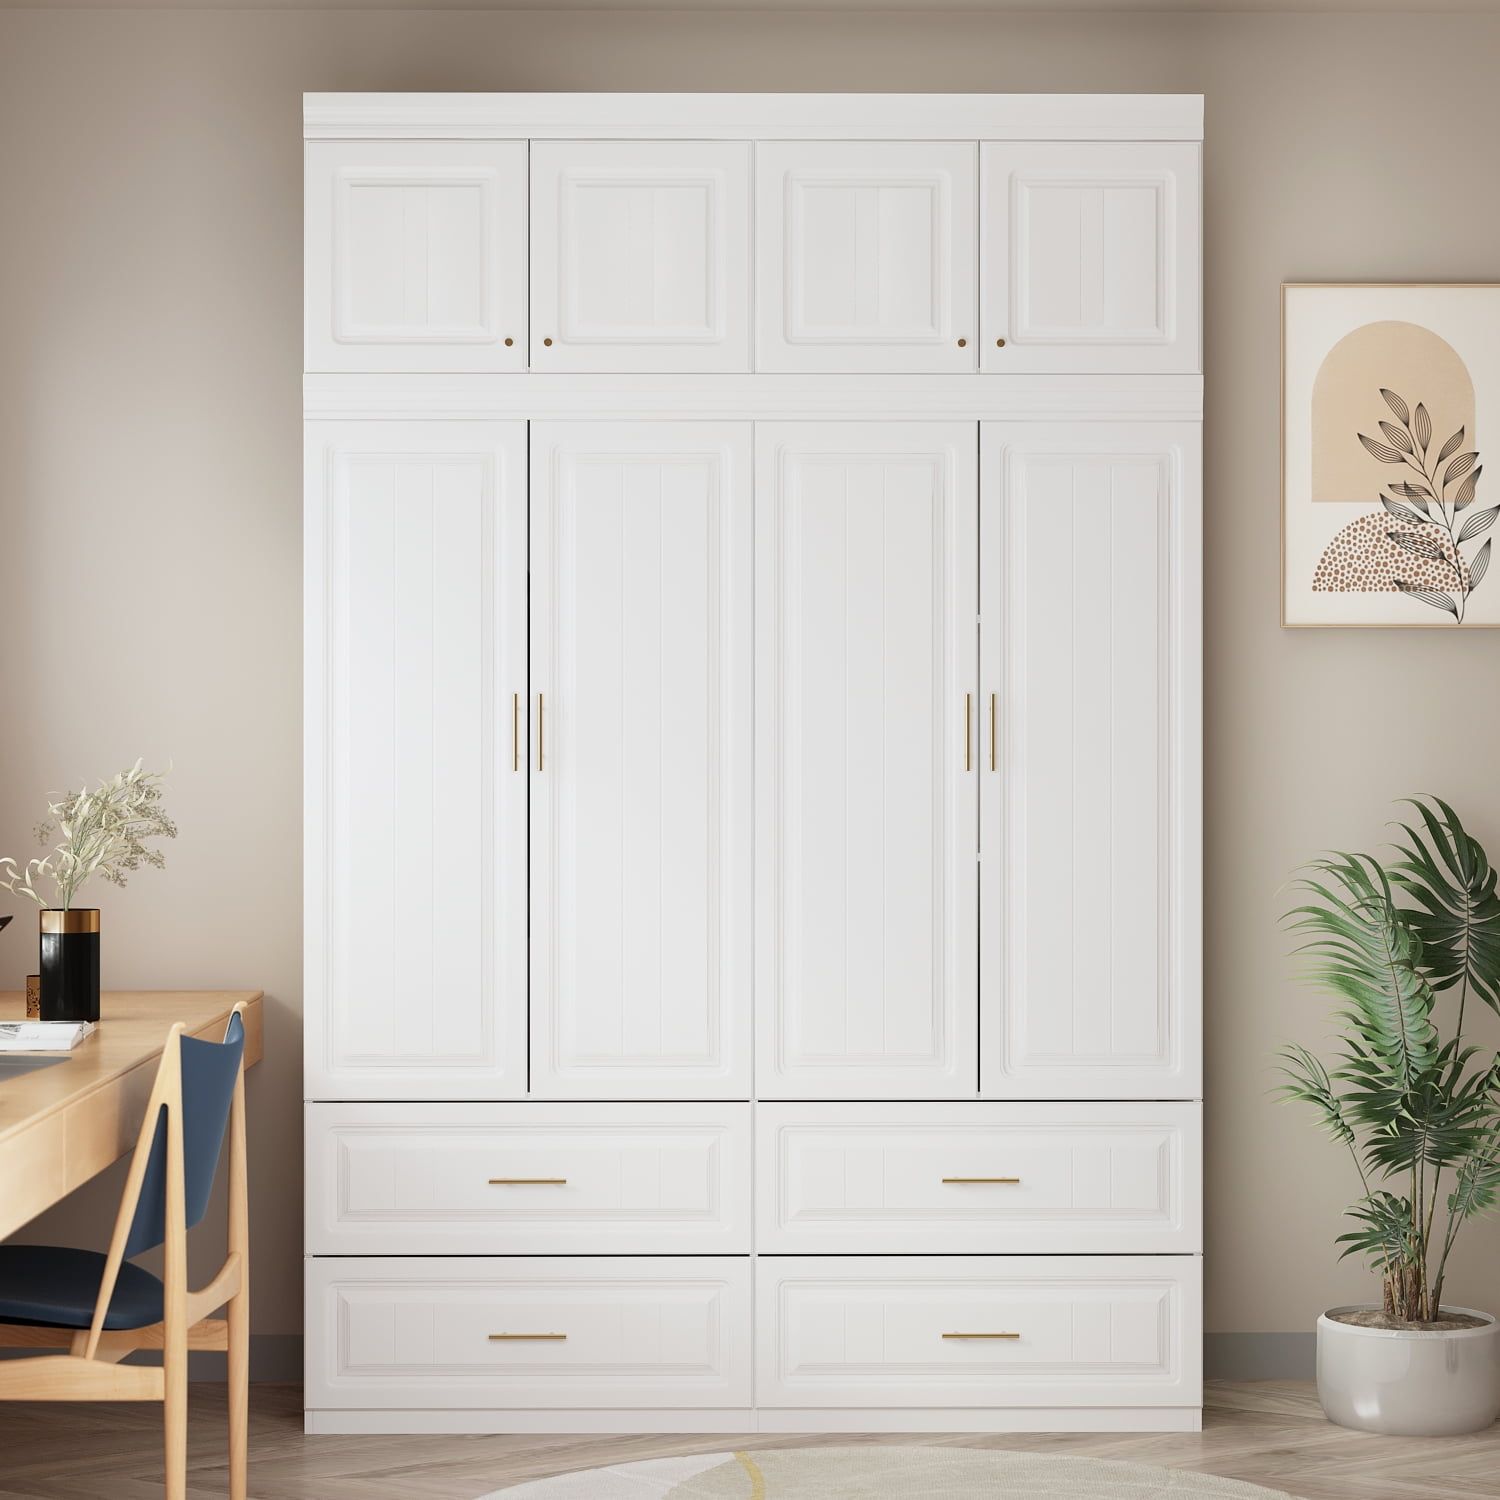 Hitow 4 Door Wardrobe Armoire With Hutch, Shelves And Drawers,white Closet  Storage Cabinet With Clothing Rod For Bedroom,  (View 4 of 15)